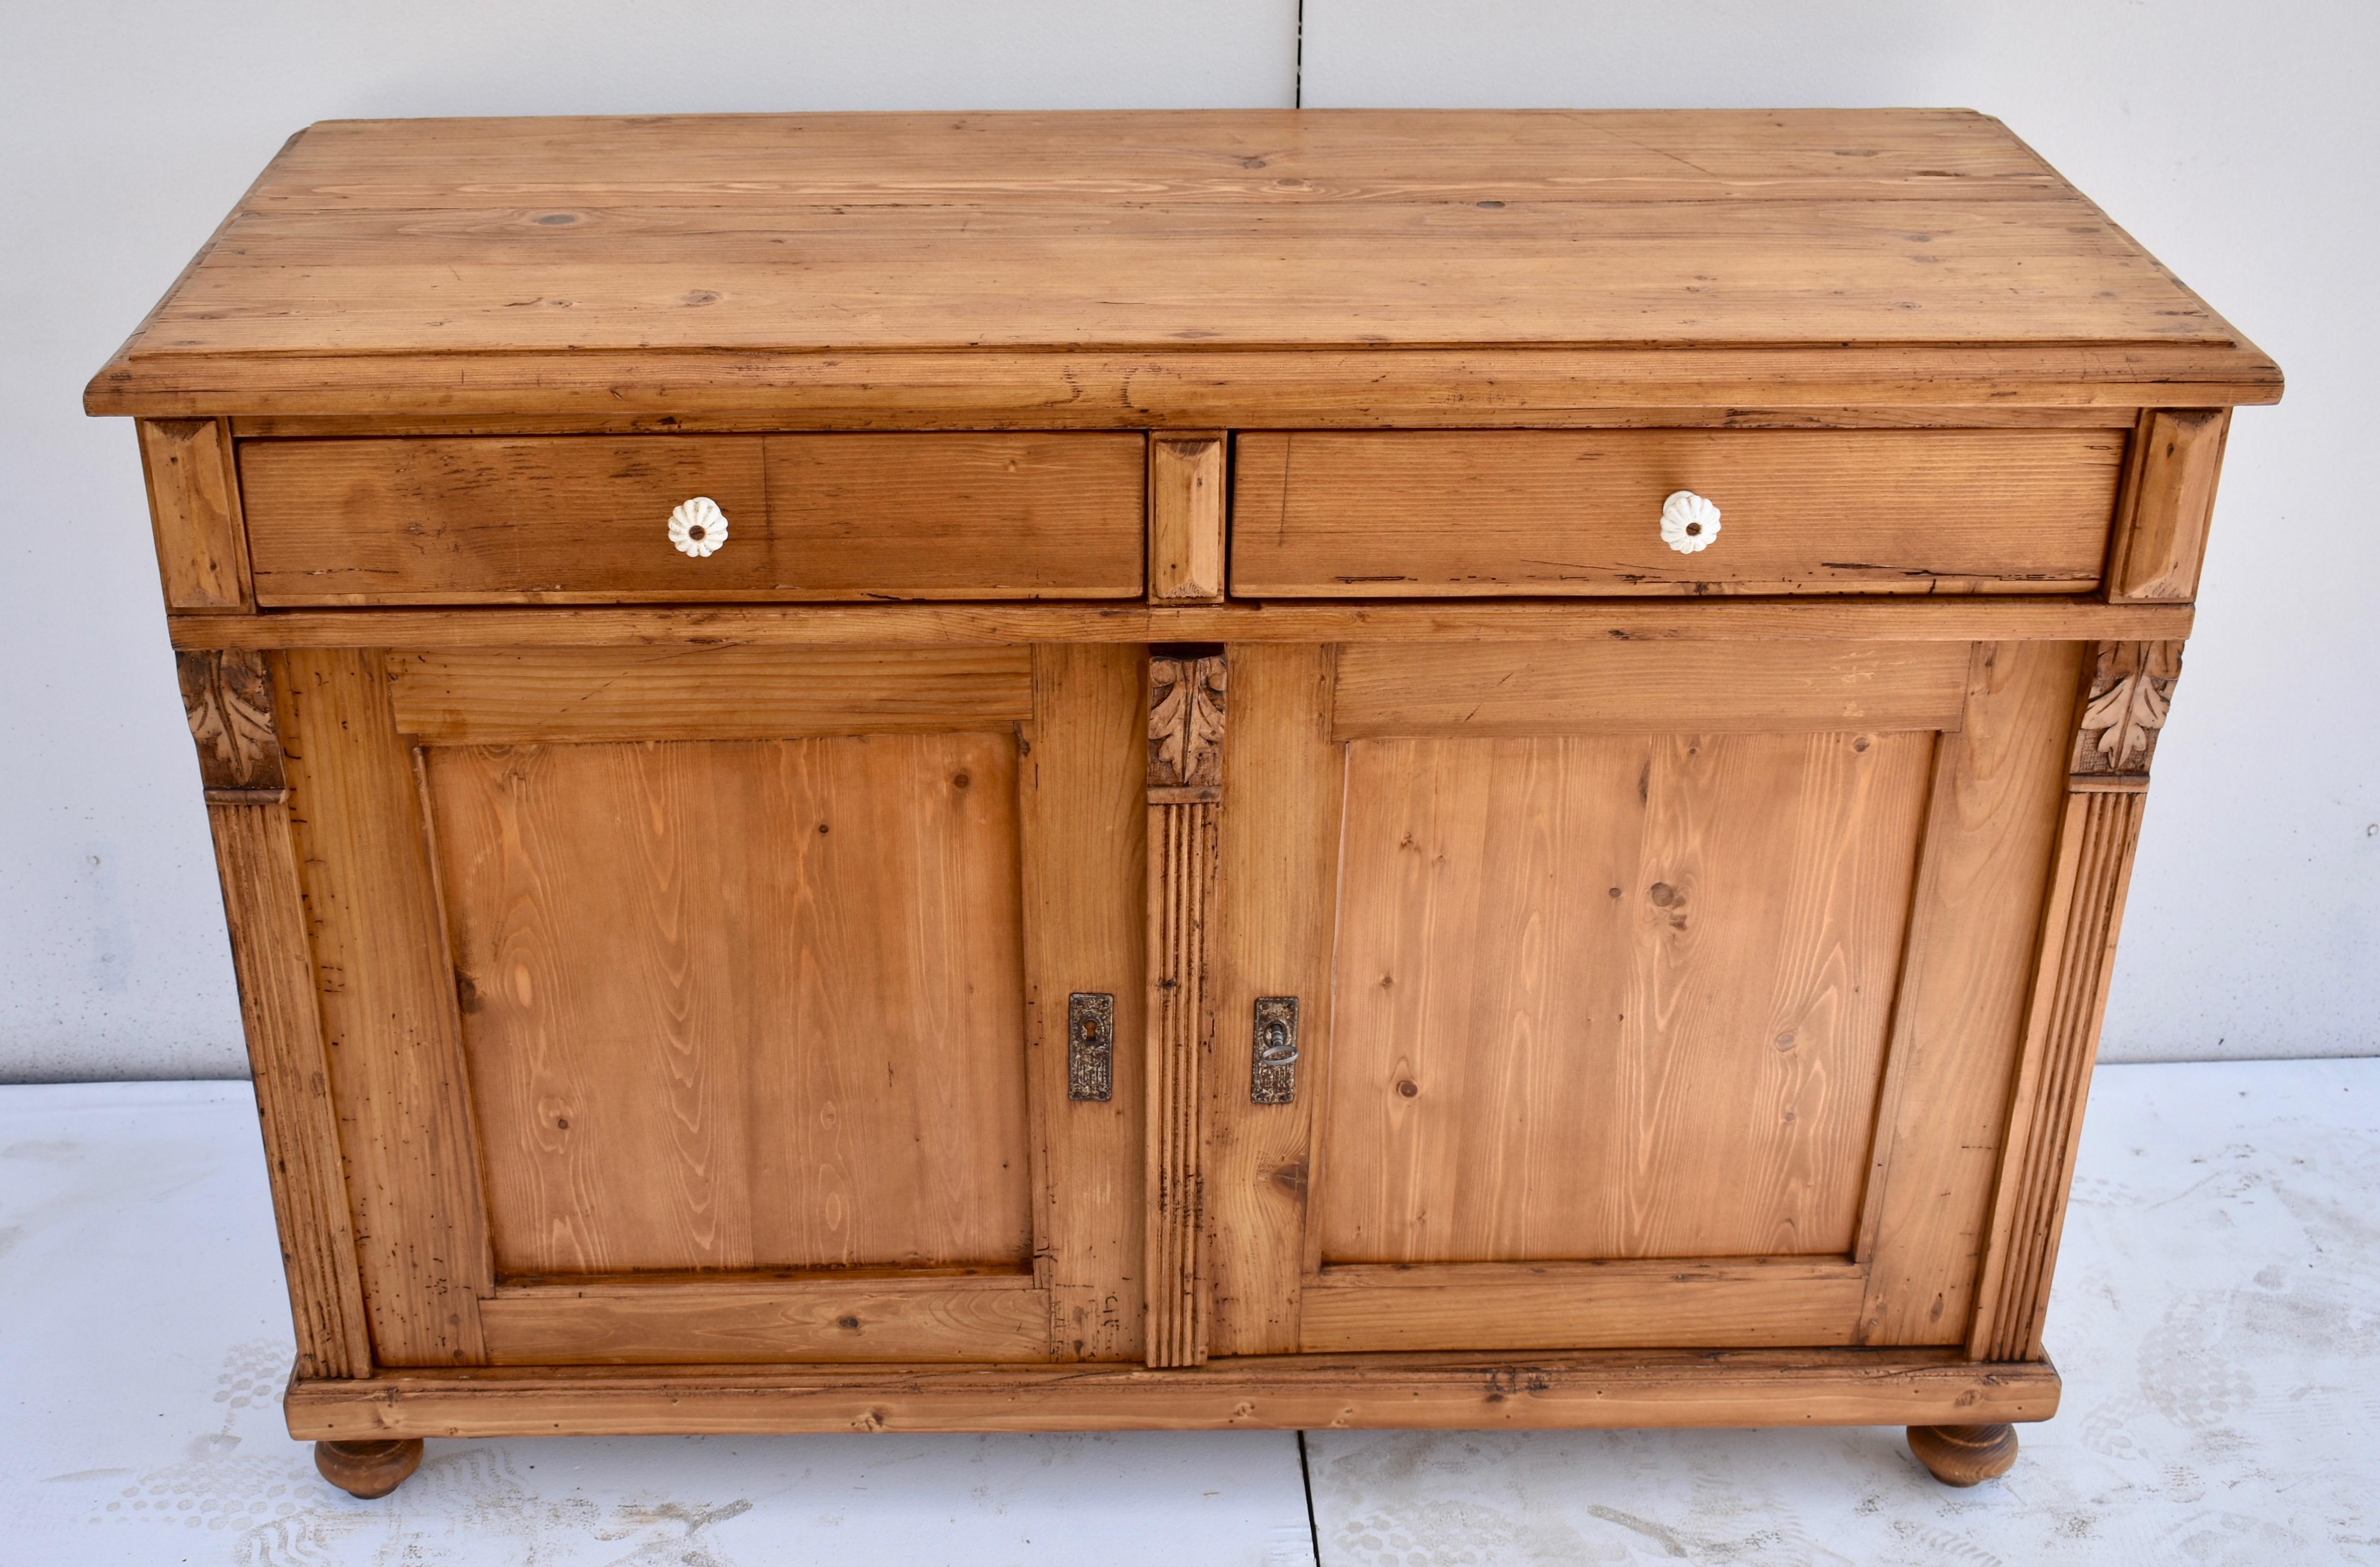 This is a very good-looking and versatile two door dresser base, with nice clear wood and a lovely warm honey color. The top has a bold step-down routed edge which sits above two shallow lap-joined drawers. The flat-paneled doors are flanked and